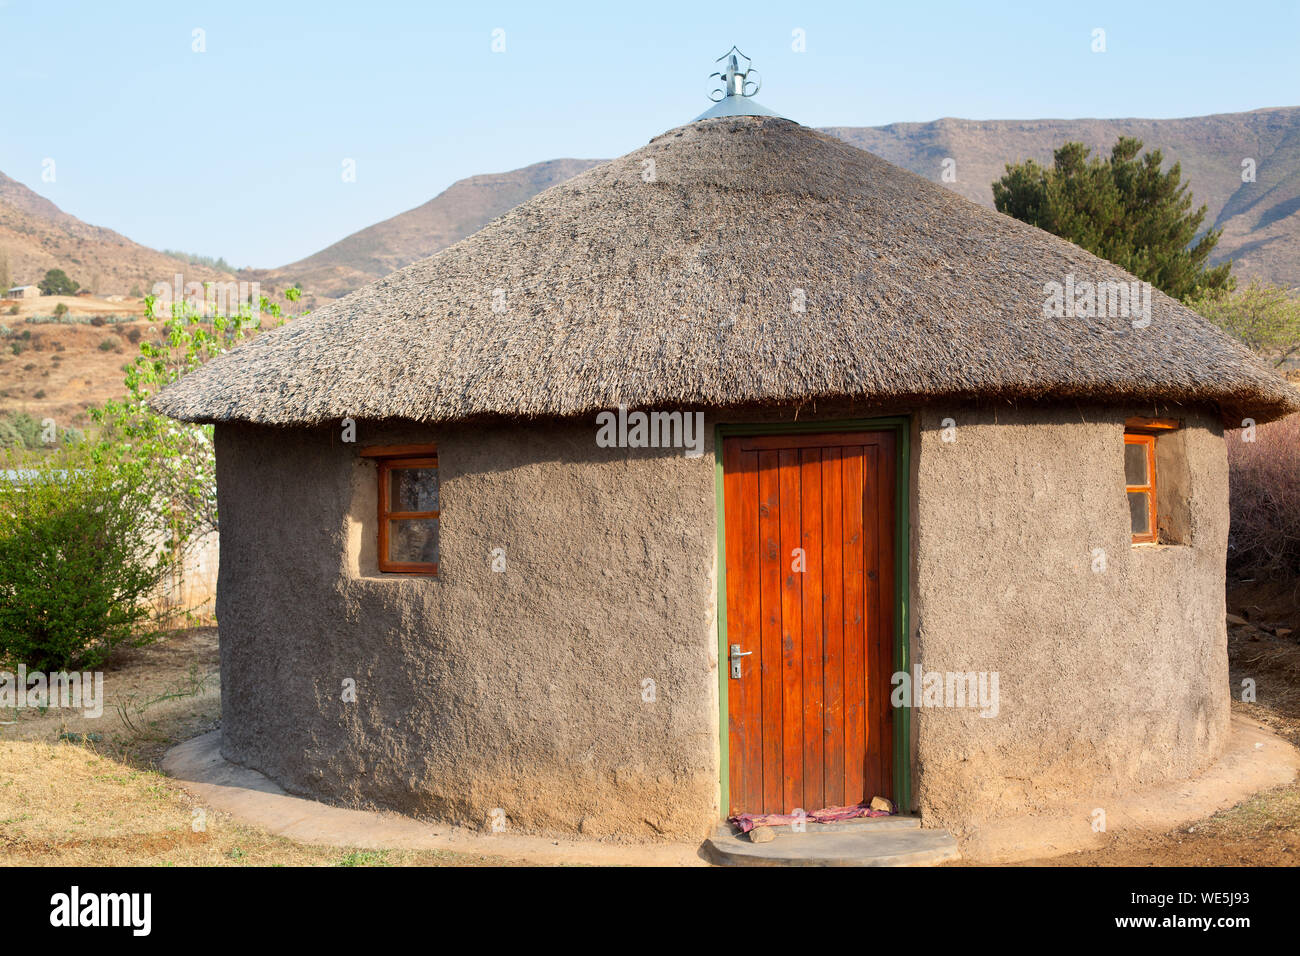 Traditional african round clay house with thatched roof in village, Lesotho, Southern Africa, basotho people national old home, Drakensberg mountains Stock Photo